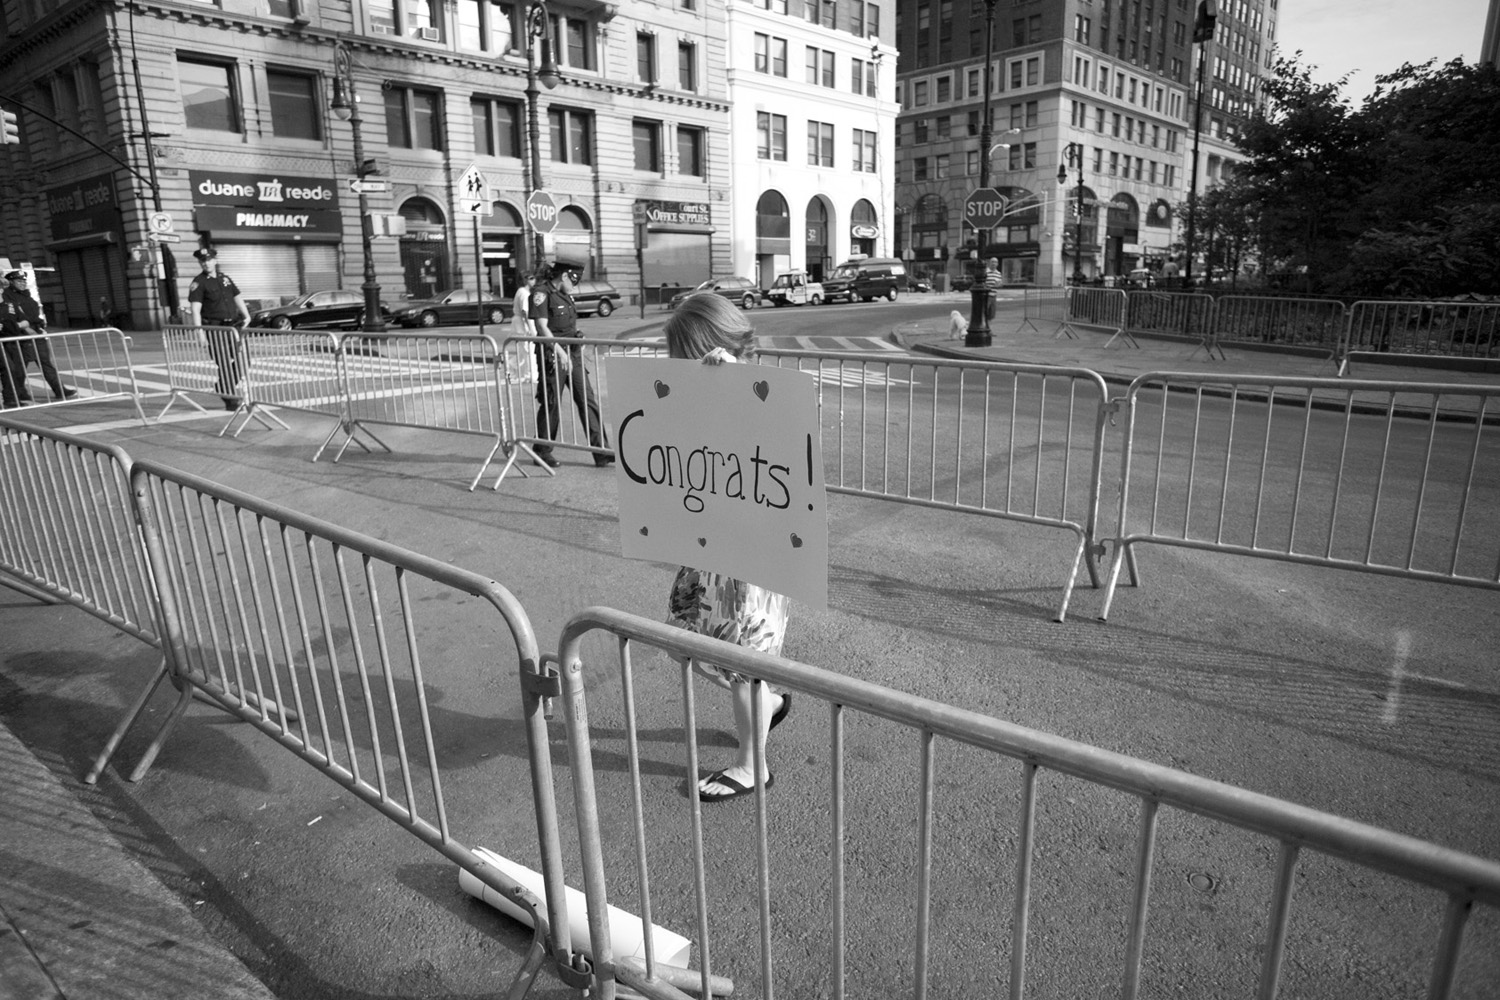 The first supporter arrives early in the morning. Same sex couples apply for marriage licenses and some have ceremonies in The Brooklyn Municipal Building at Brooklyn Borough Hall on July 24, 2011.